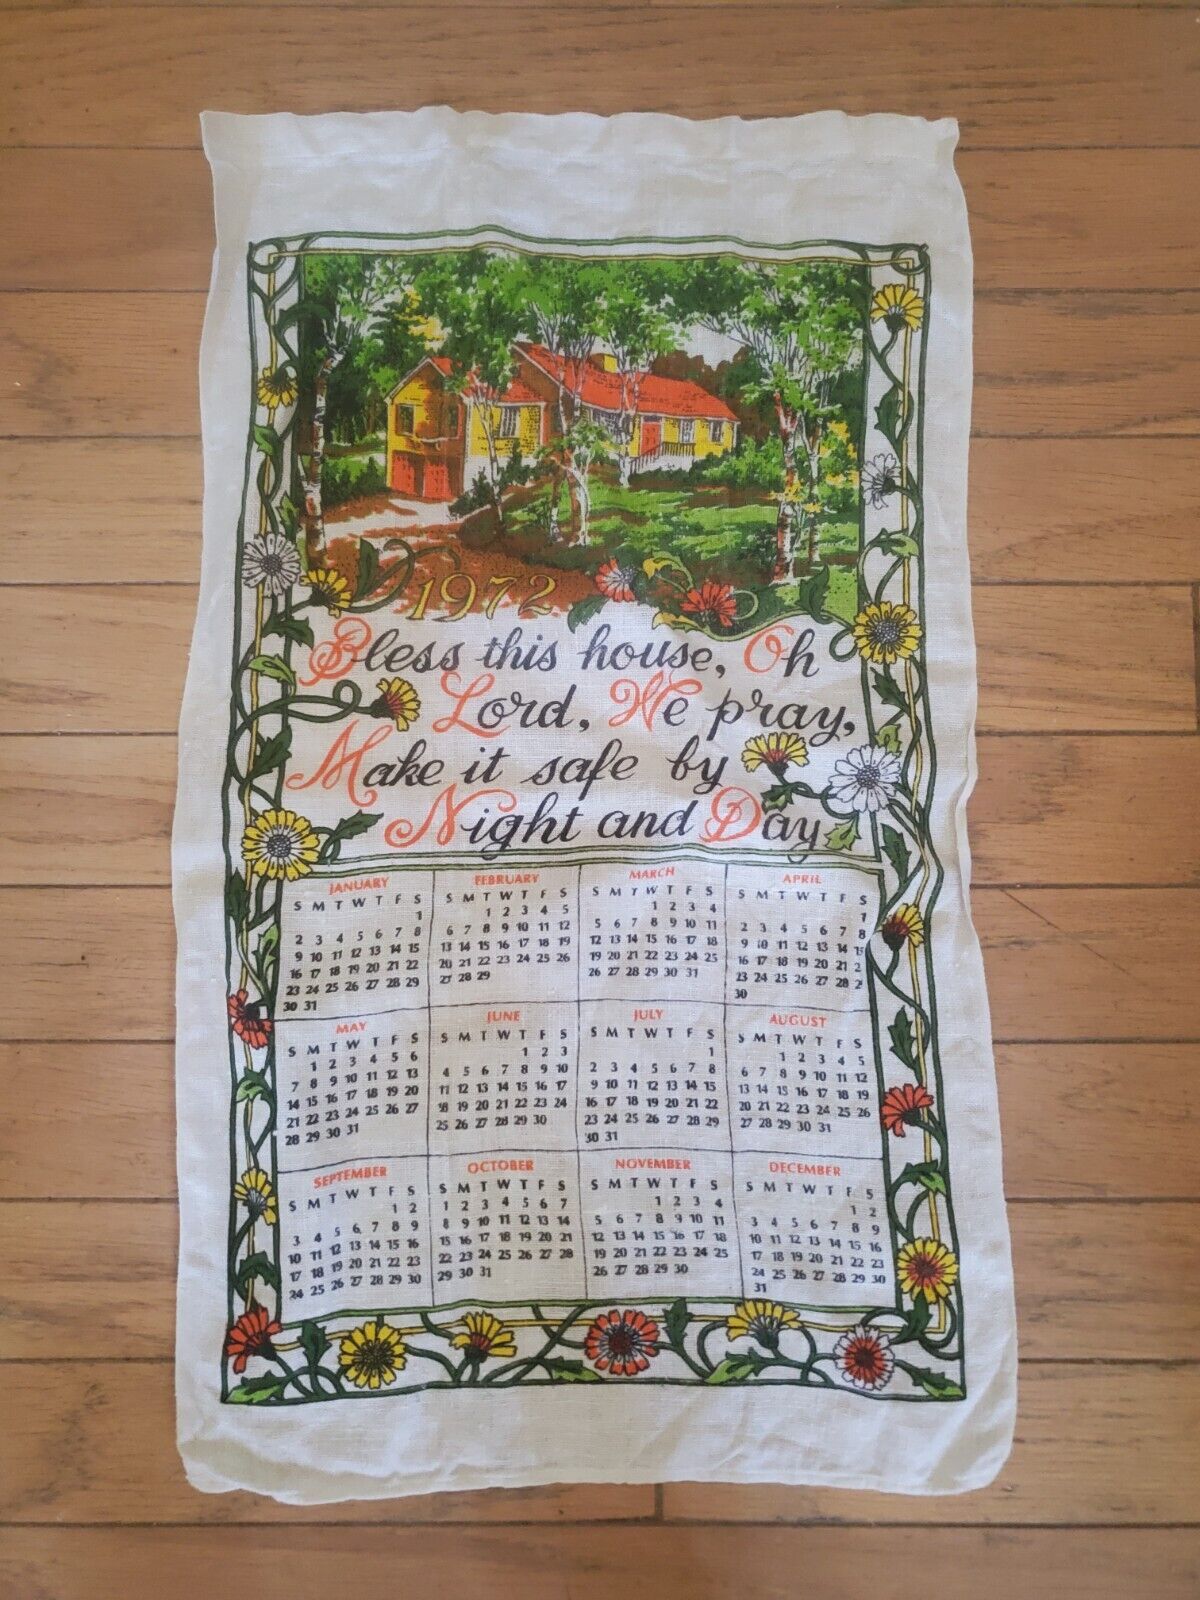 vintage 1972 Towel Linen Dishcloth Calendar Bless this house Lord